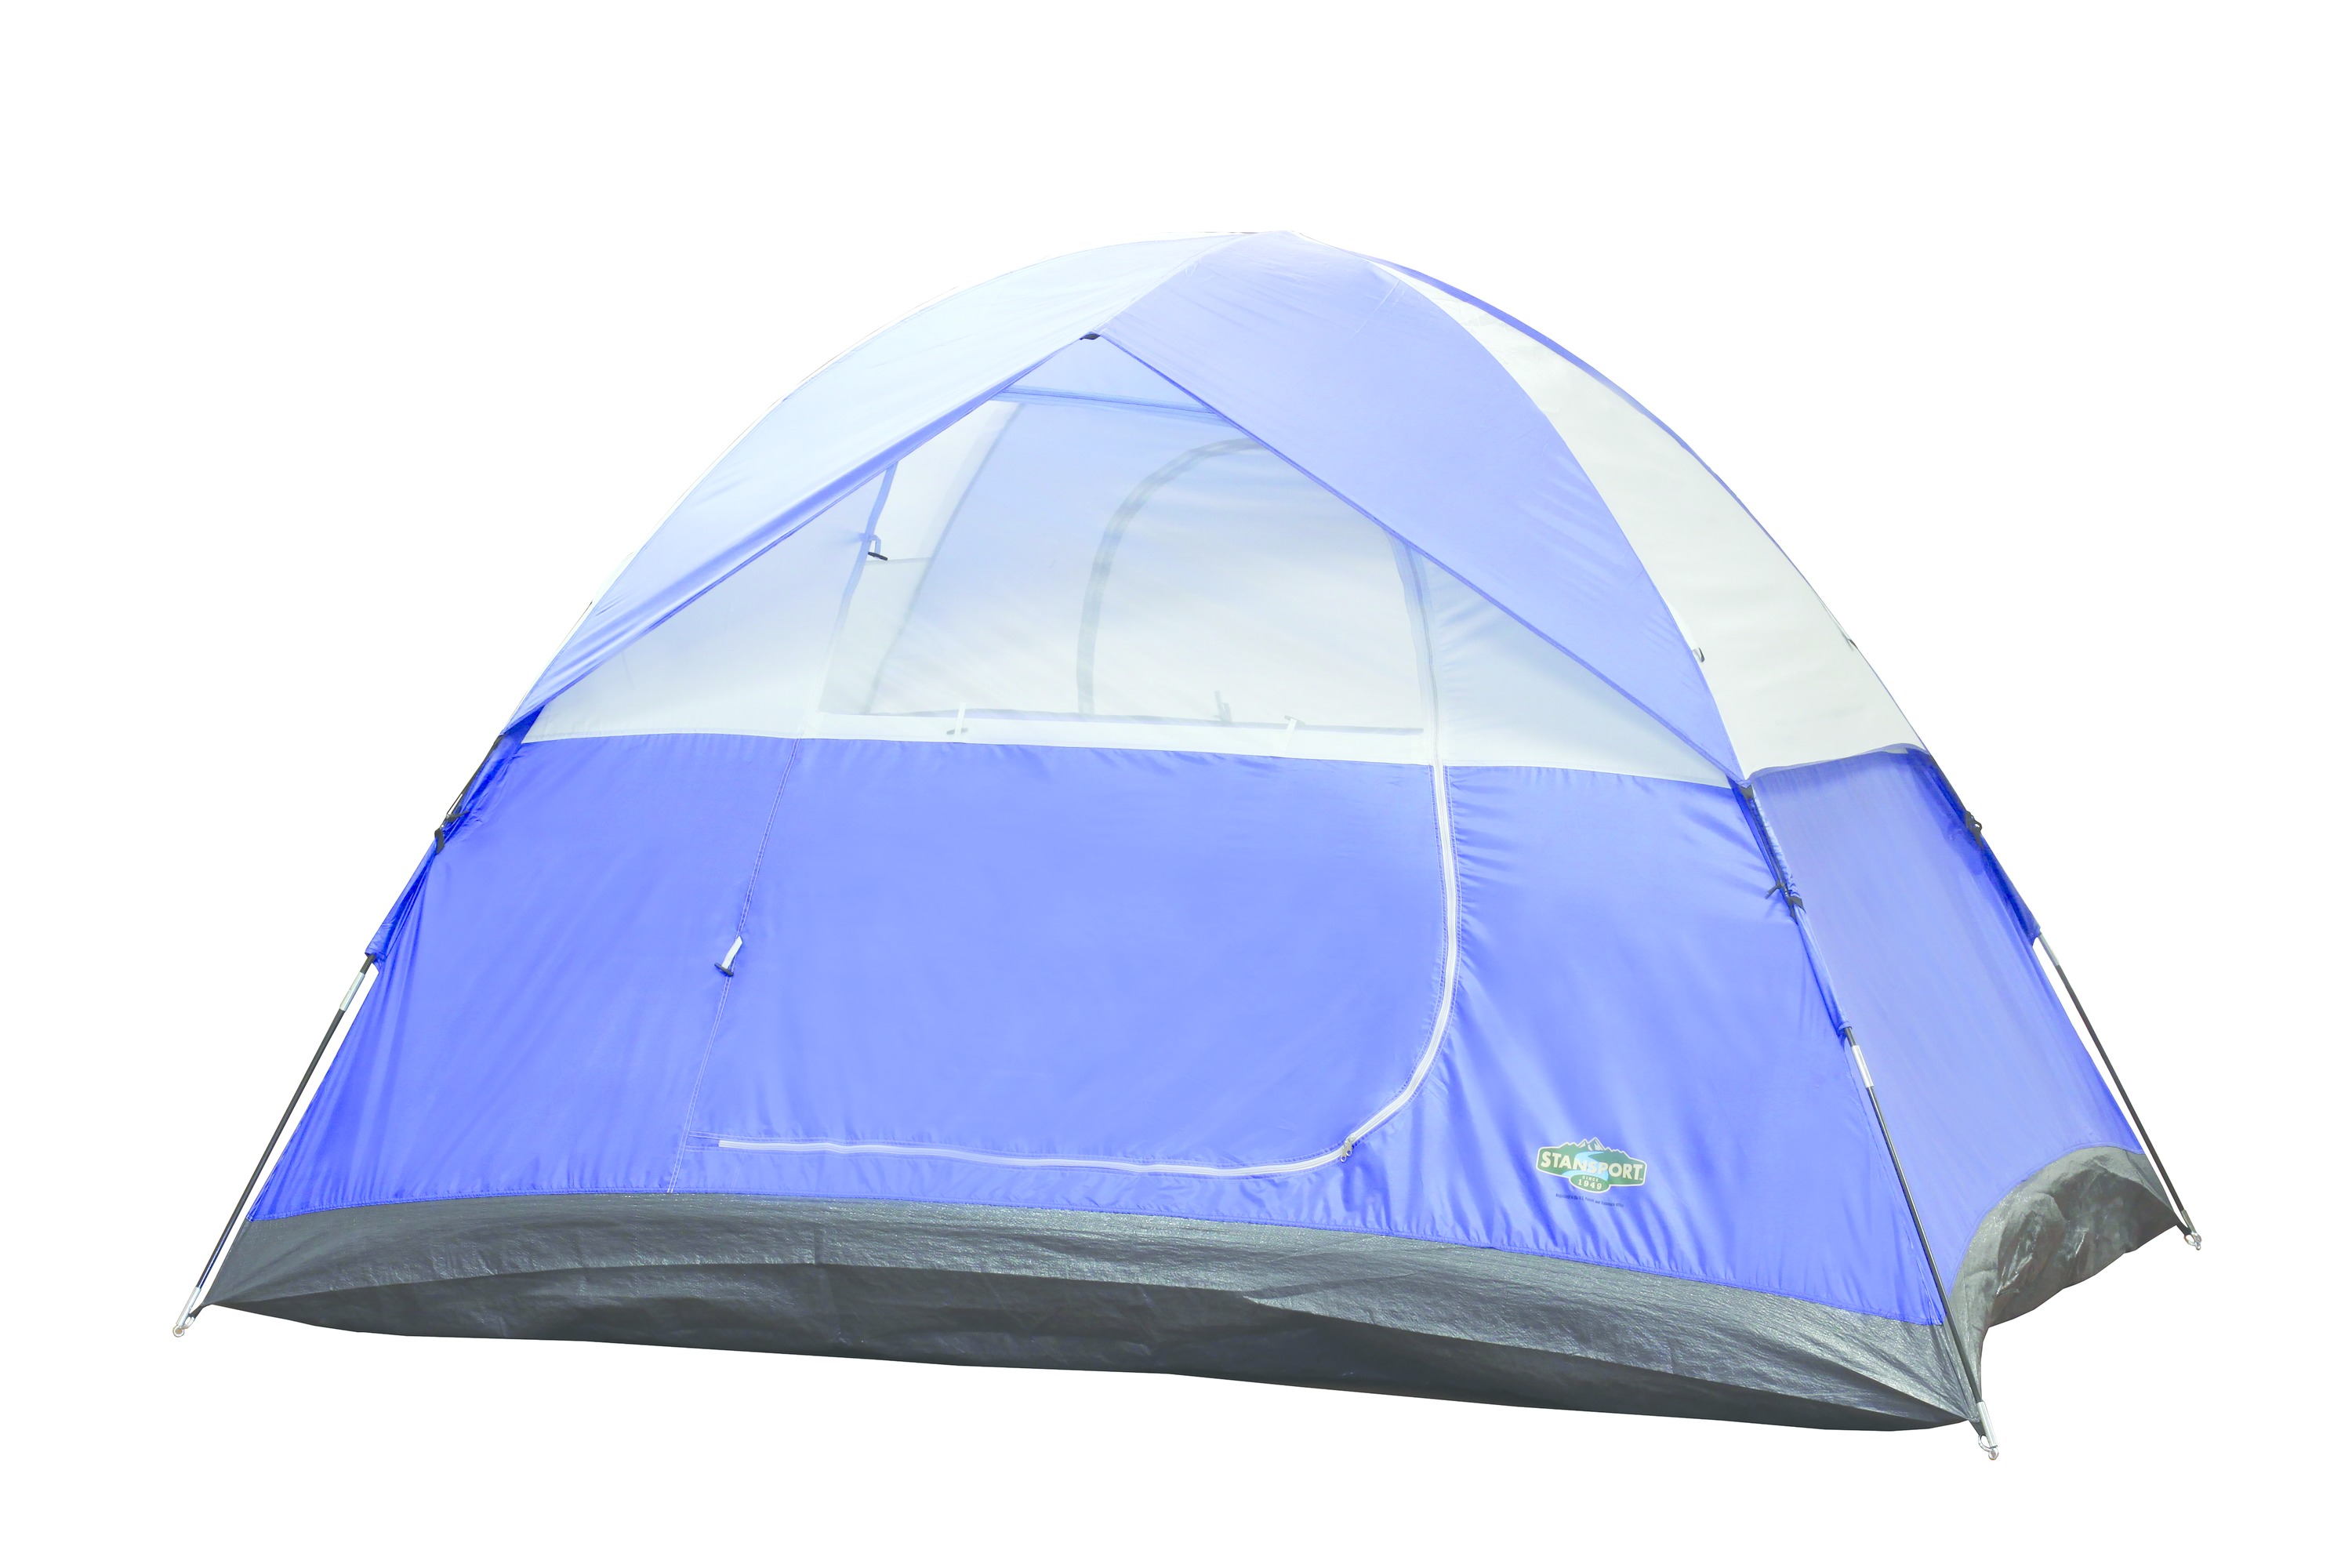 TENTS SLEEPING BAGS & COTS